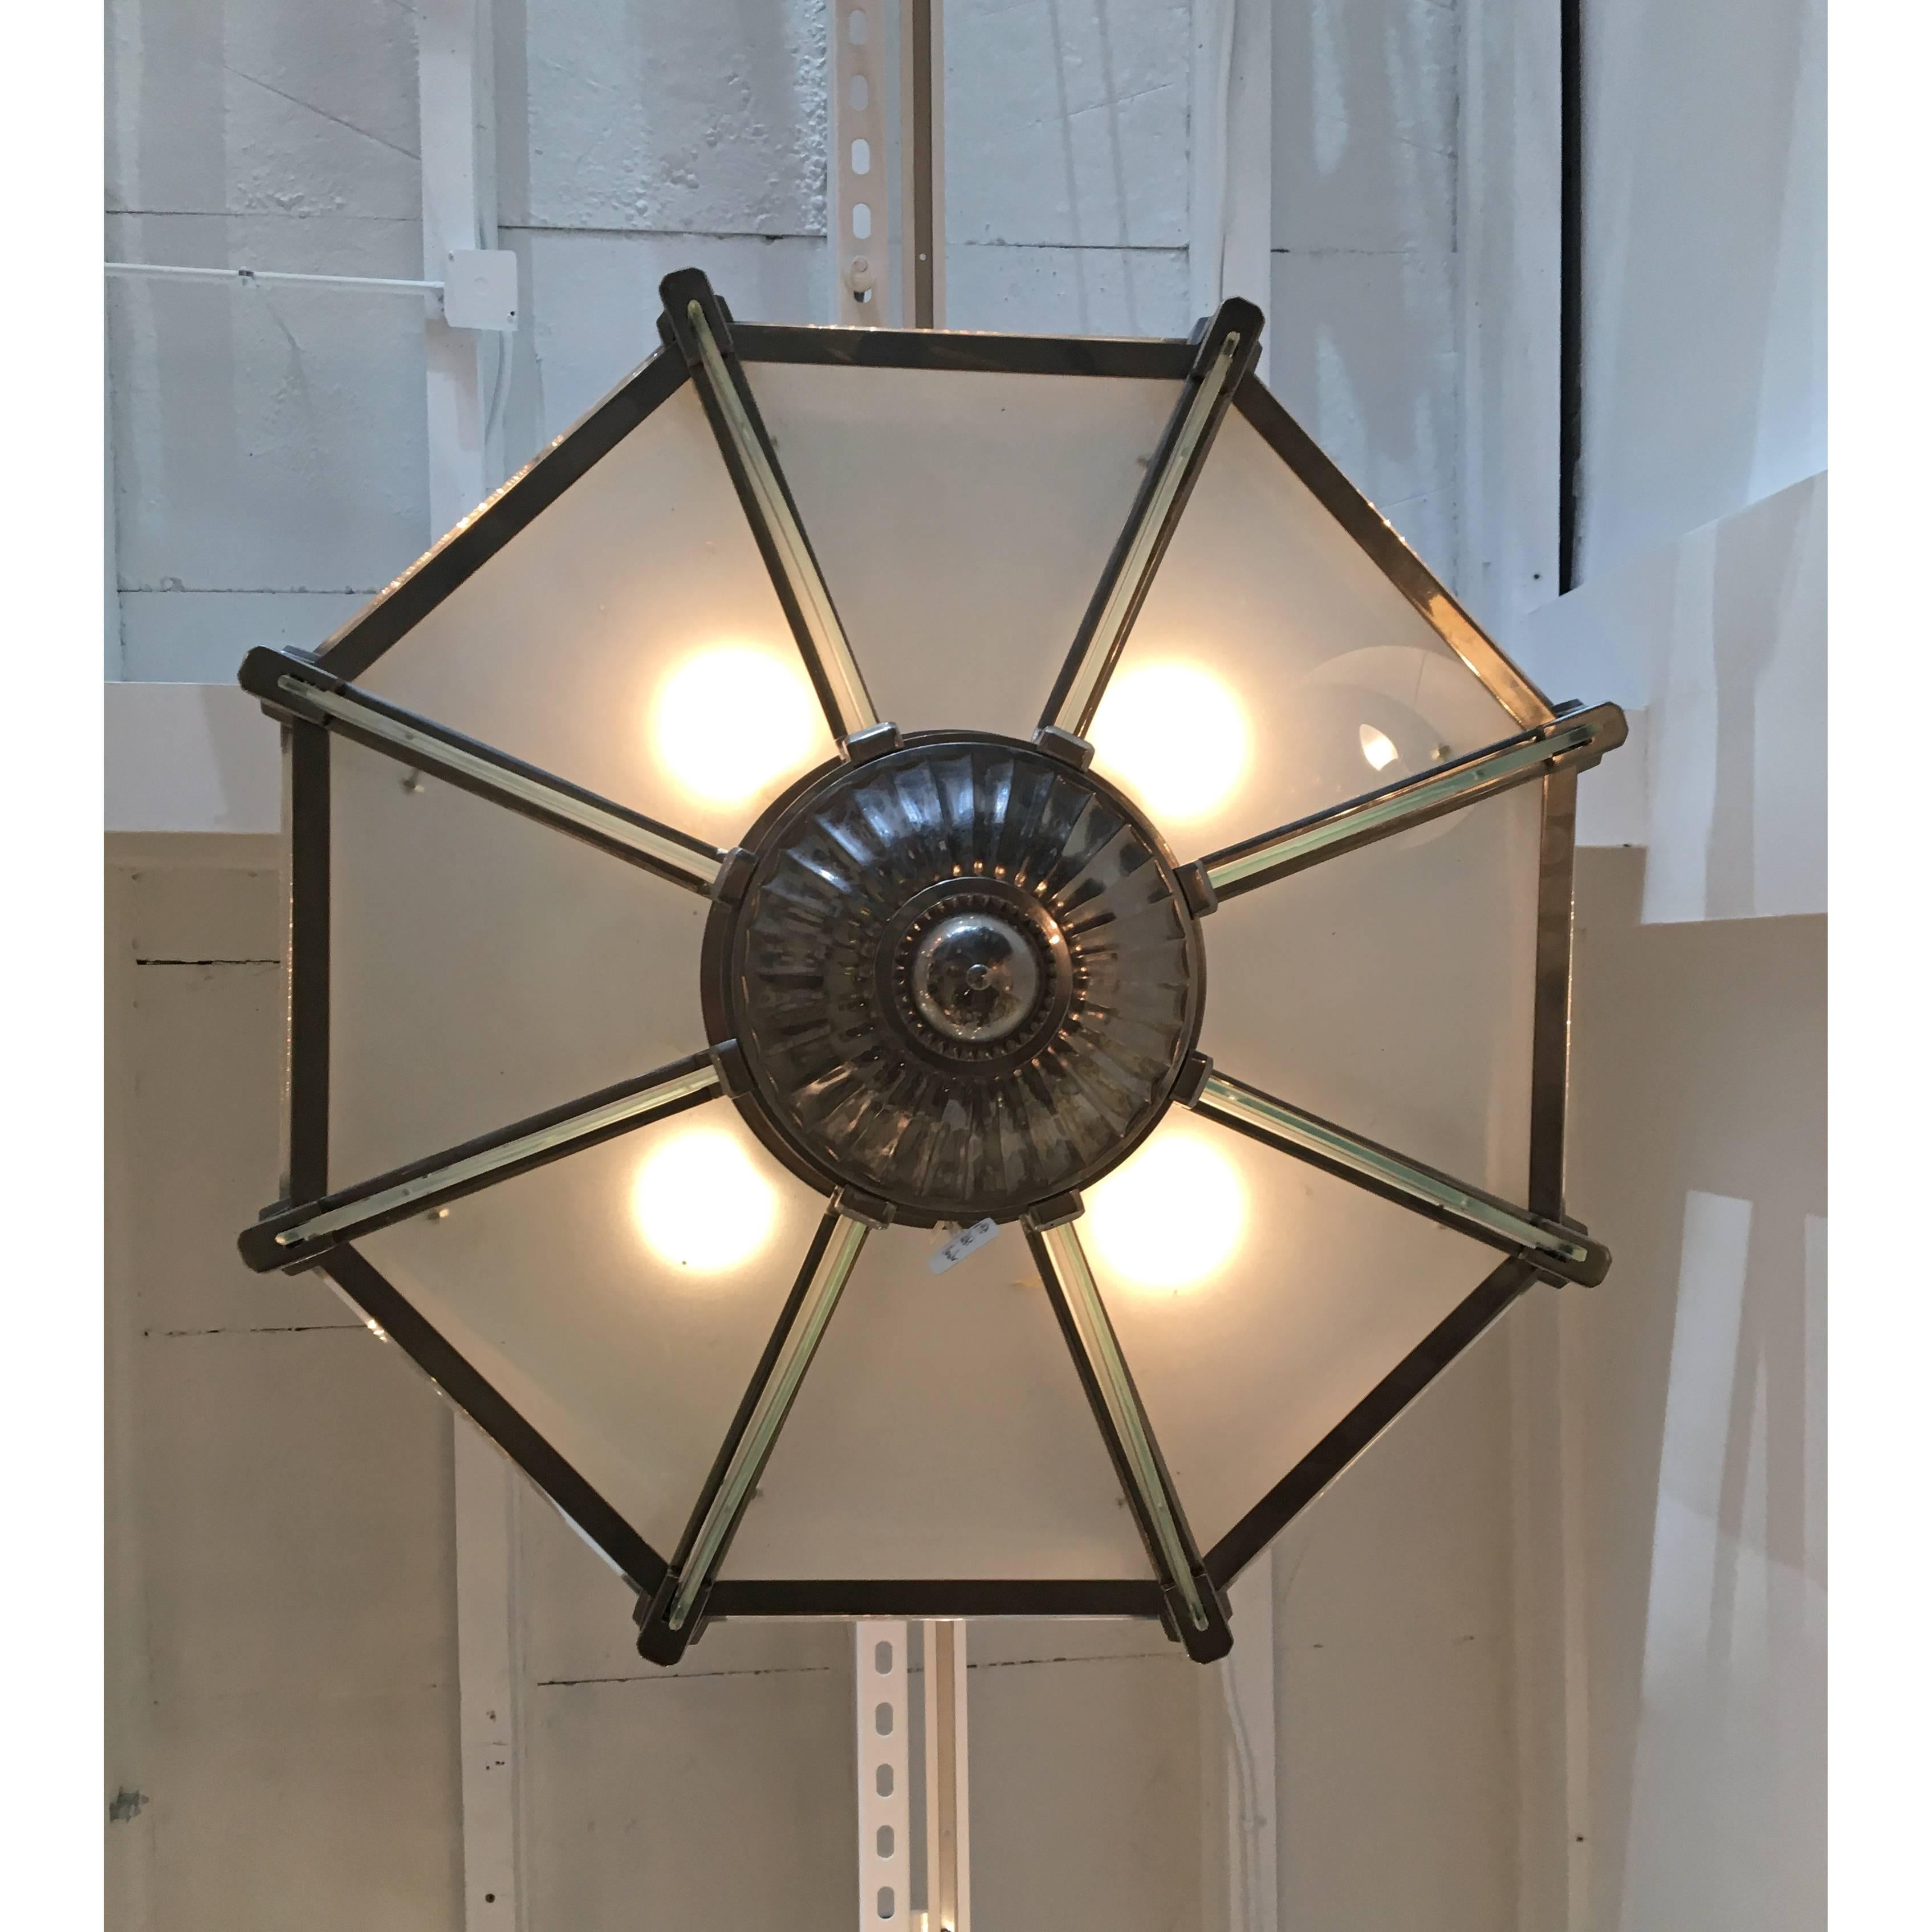 French Art Deco Modernist Chandelier by Atelier Petitot In Good Condition For Sale In Coral Gables, FL